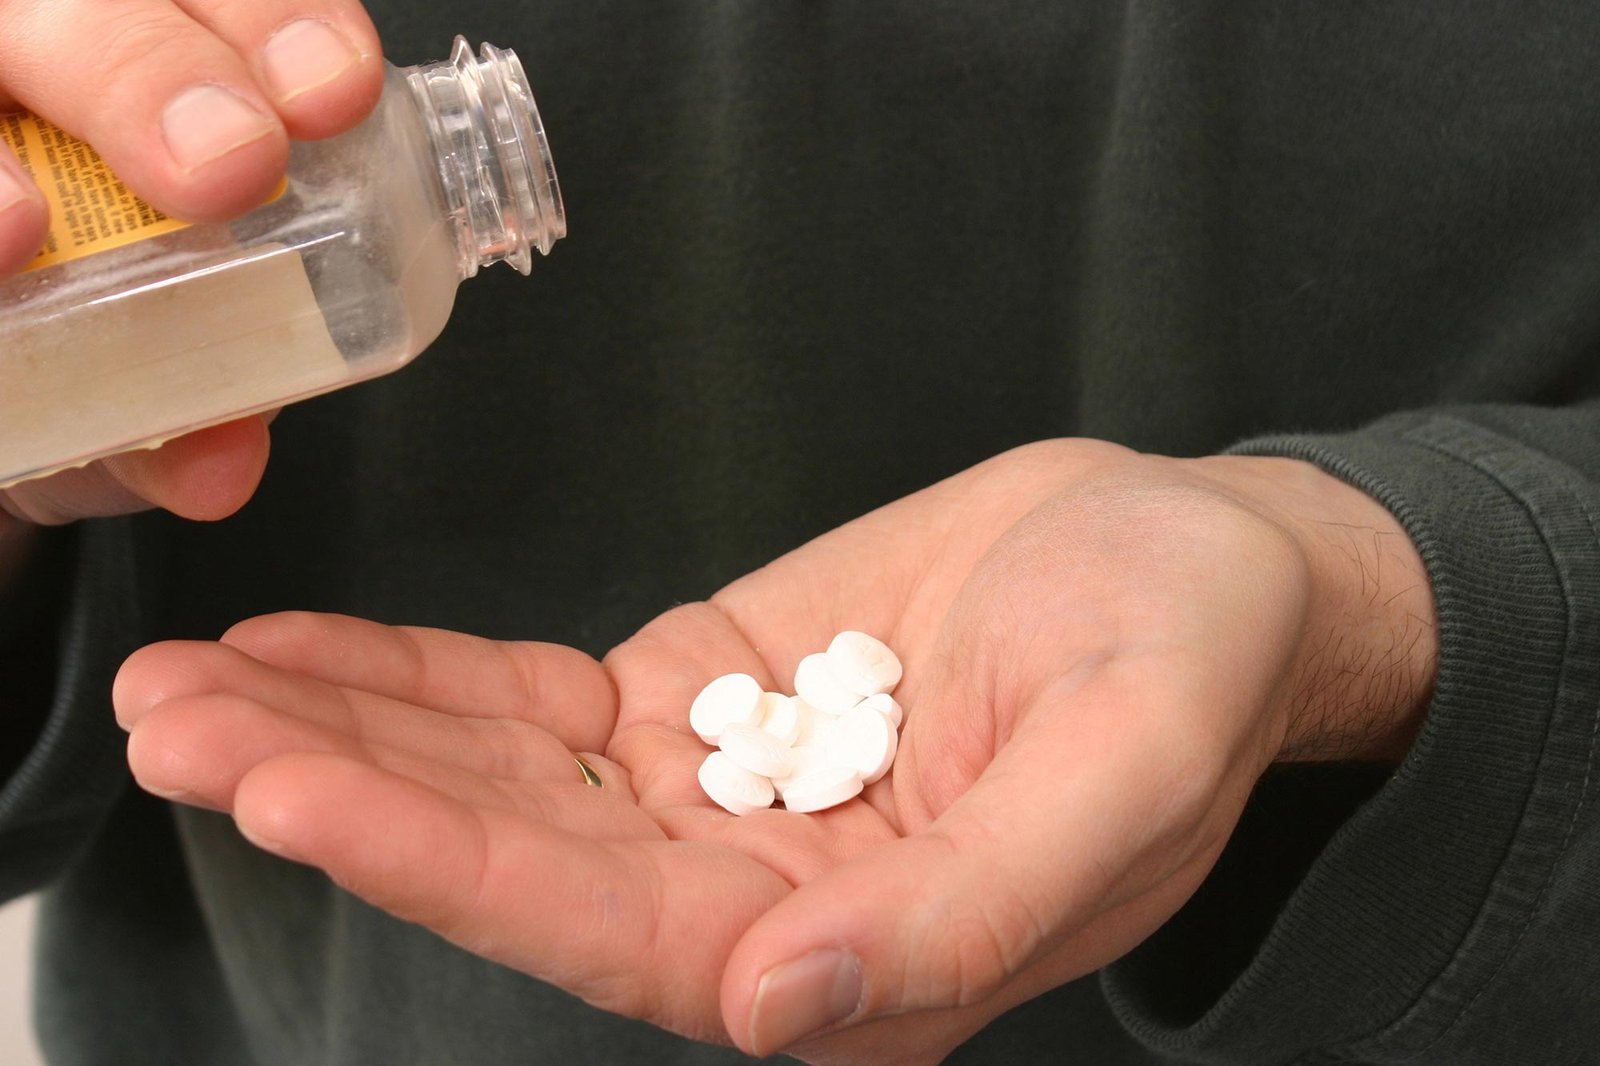 Alarm Raised Over Widespread Aspirin Use in Older Adults